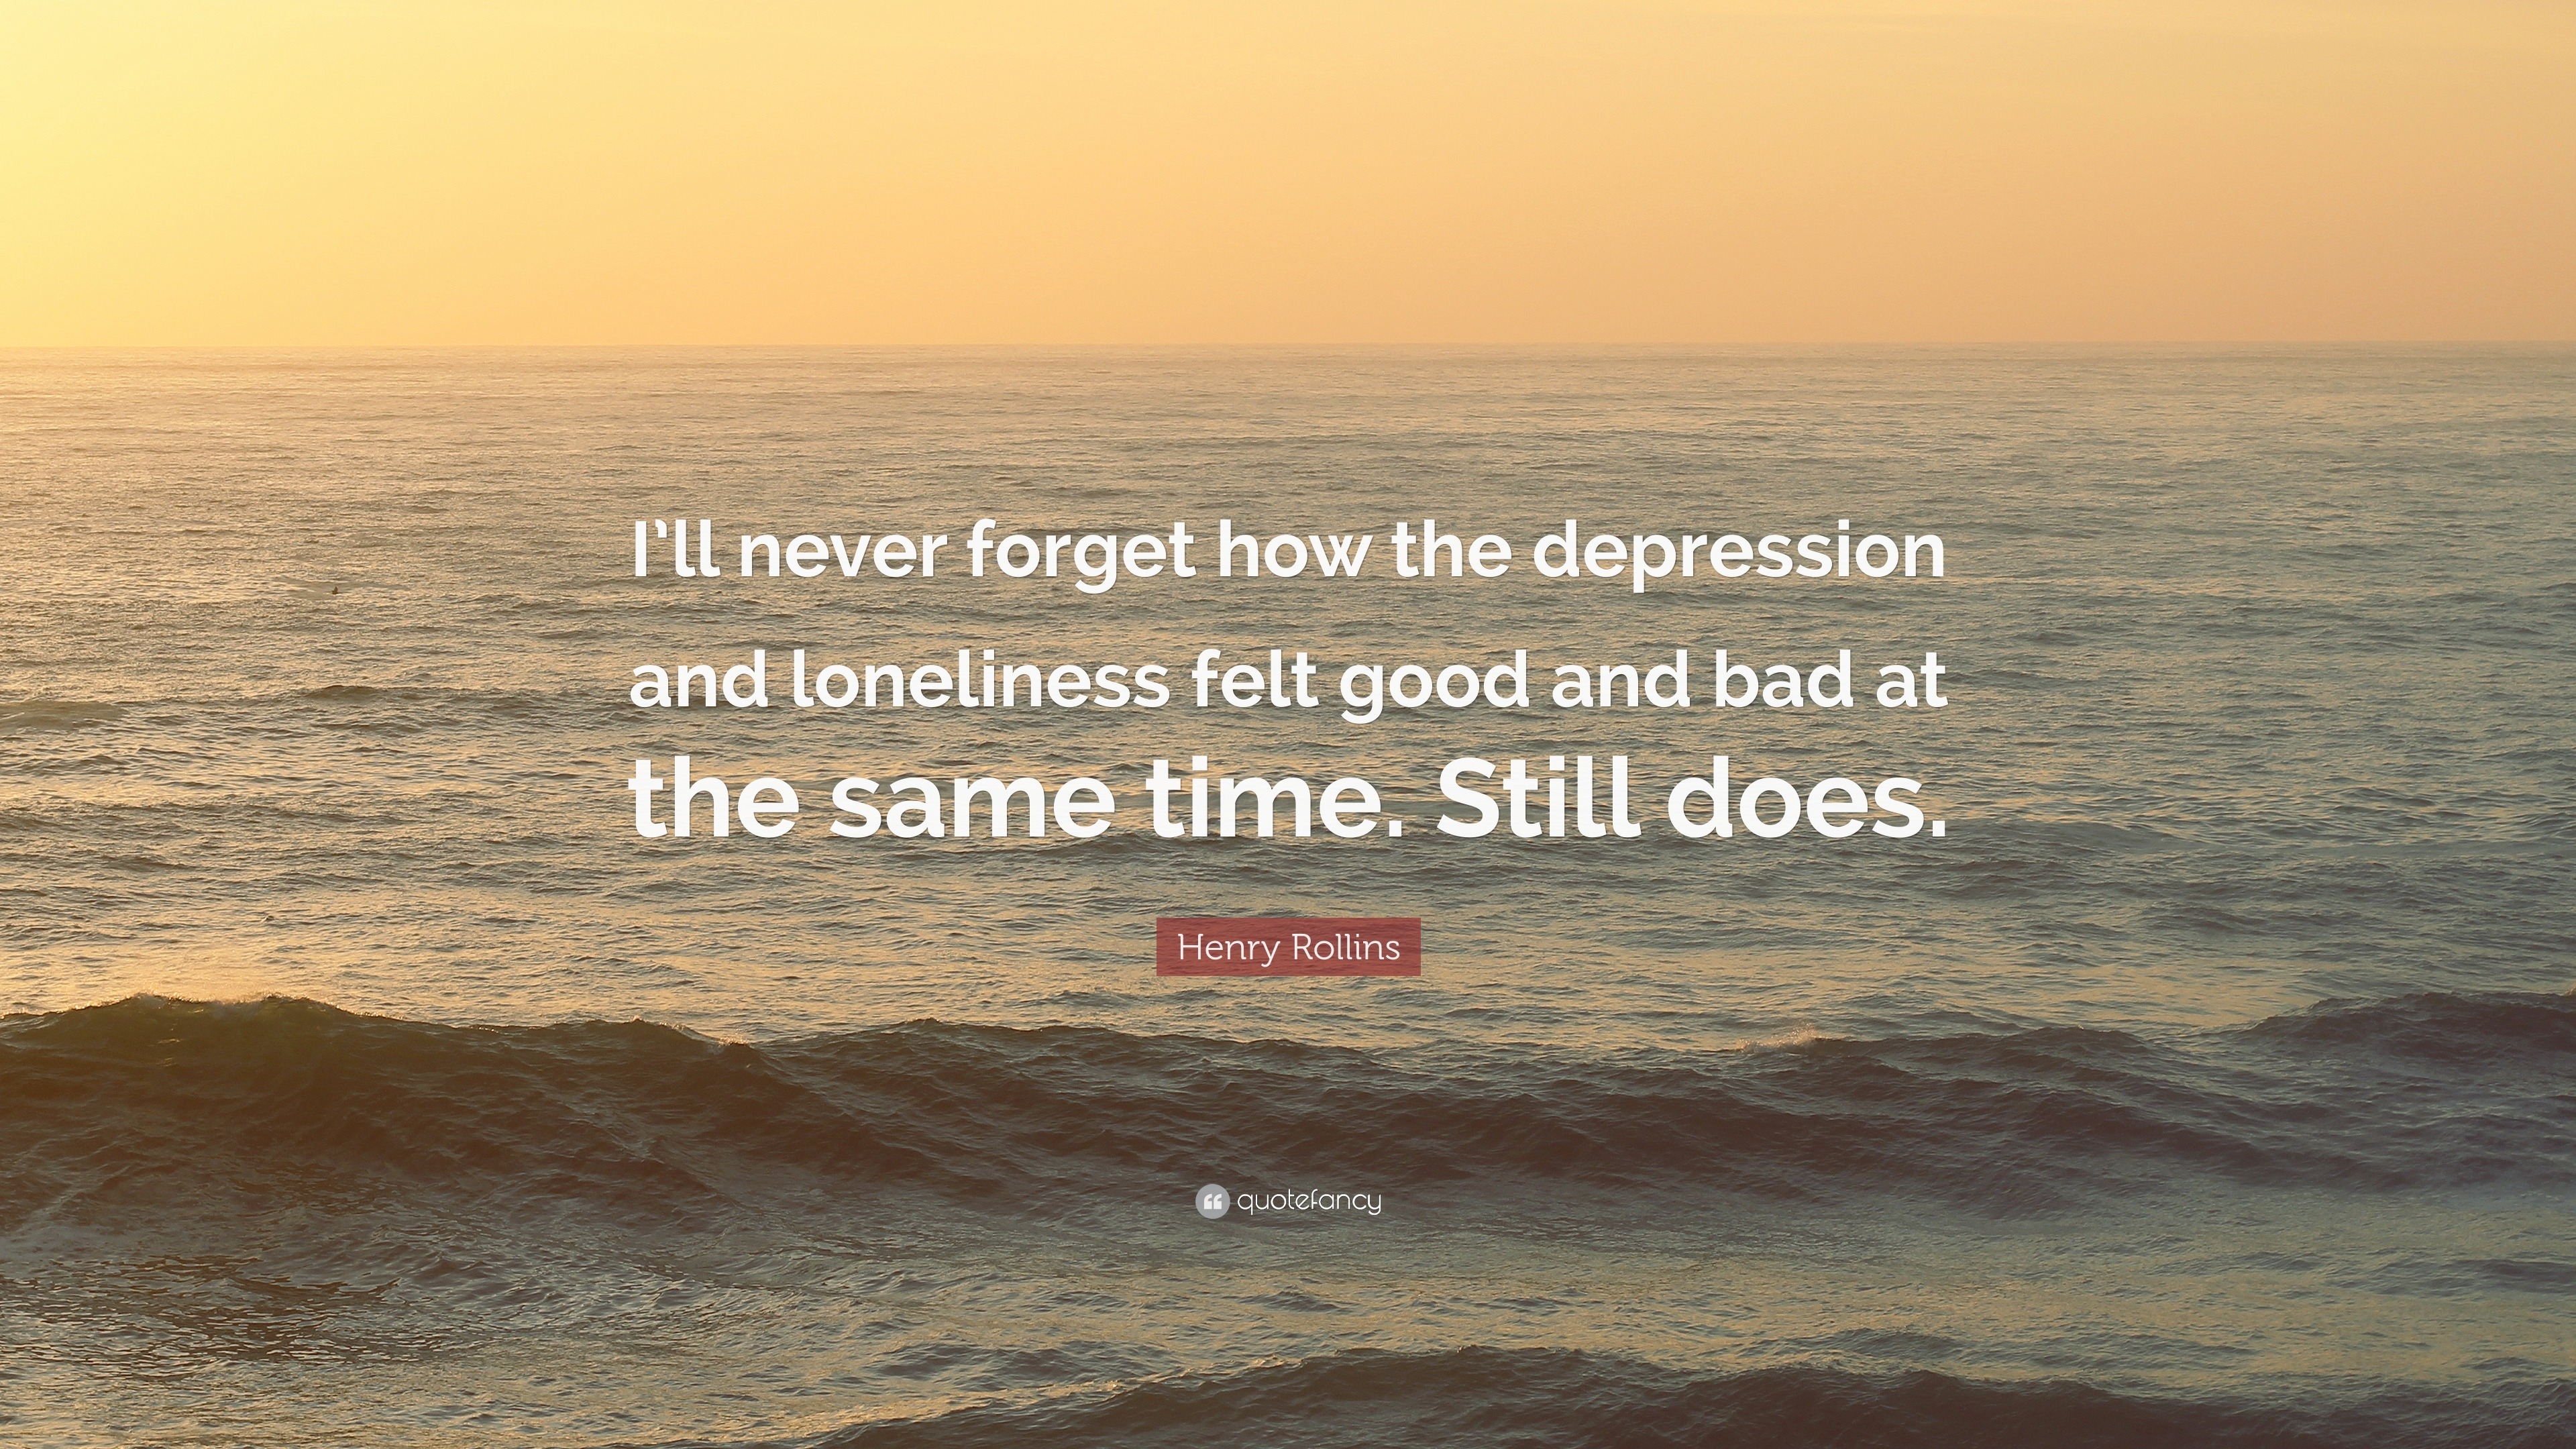 Depression Quotes (40 wallpapers) - Quotefancy